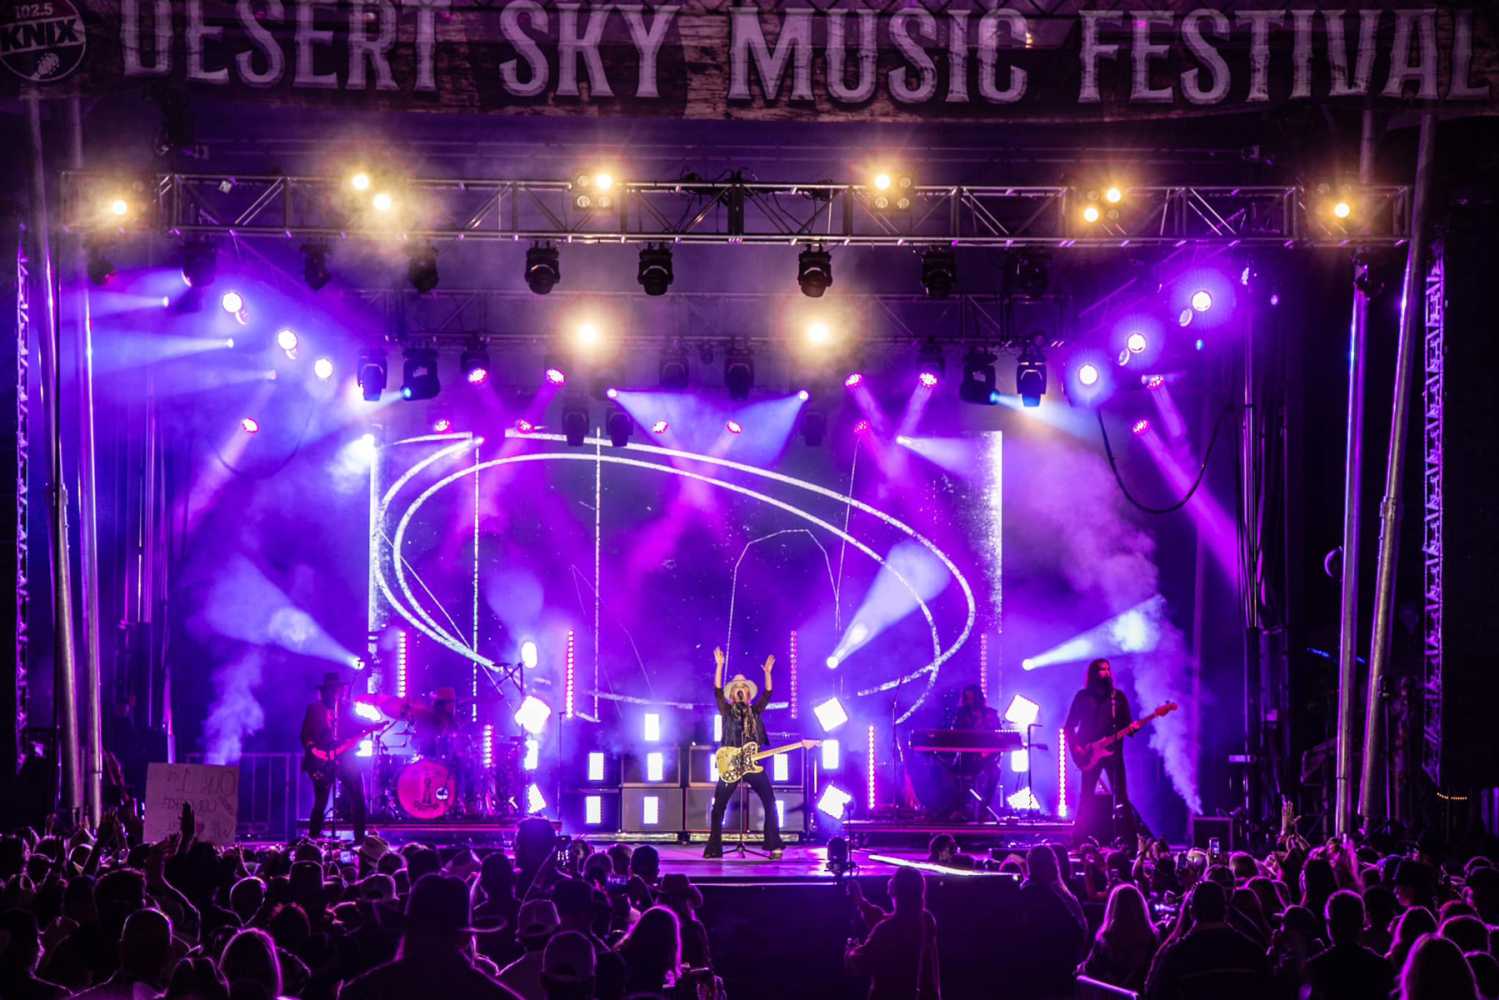 Over 75 versatile Chauvet fixtures featured in the festival rig